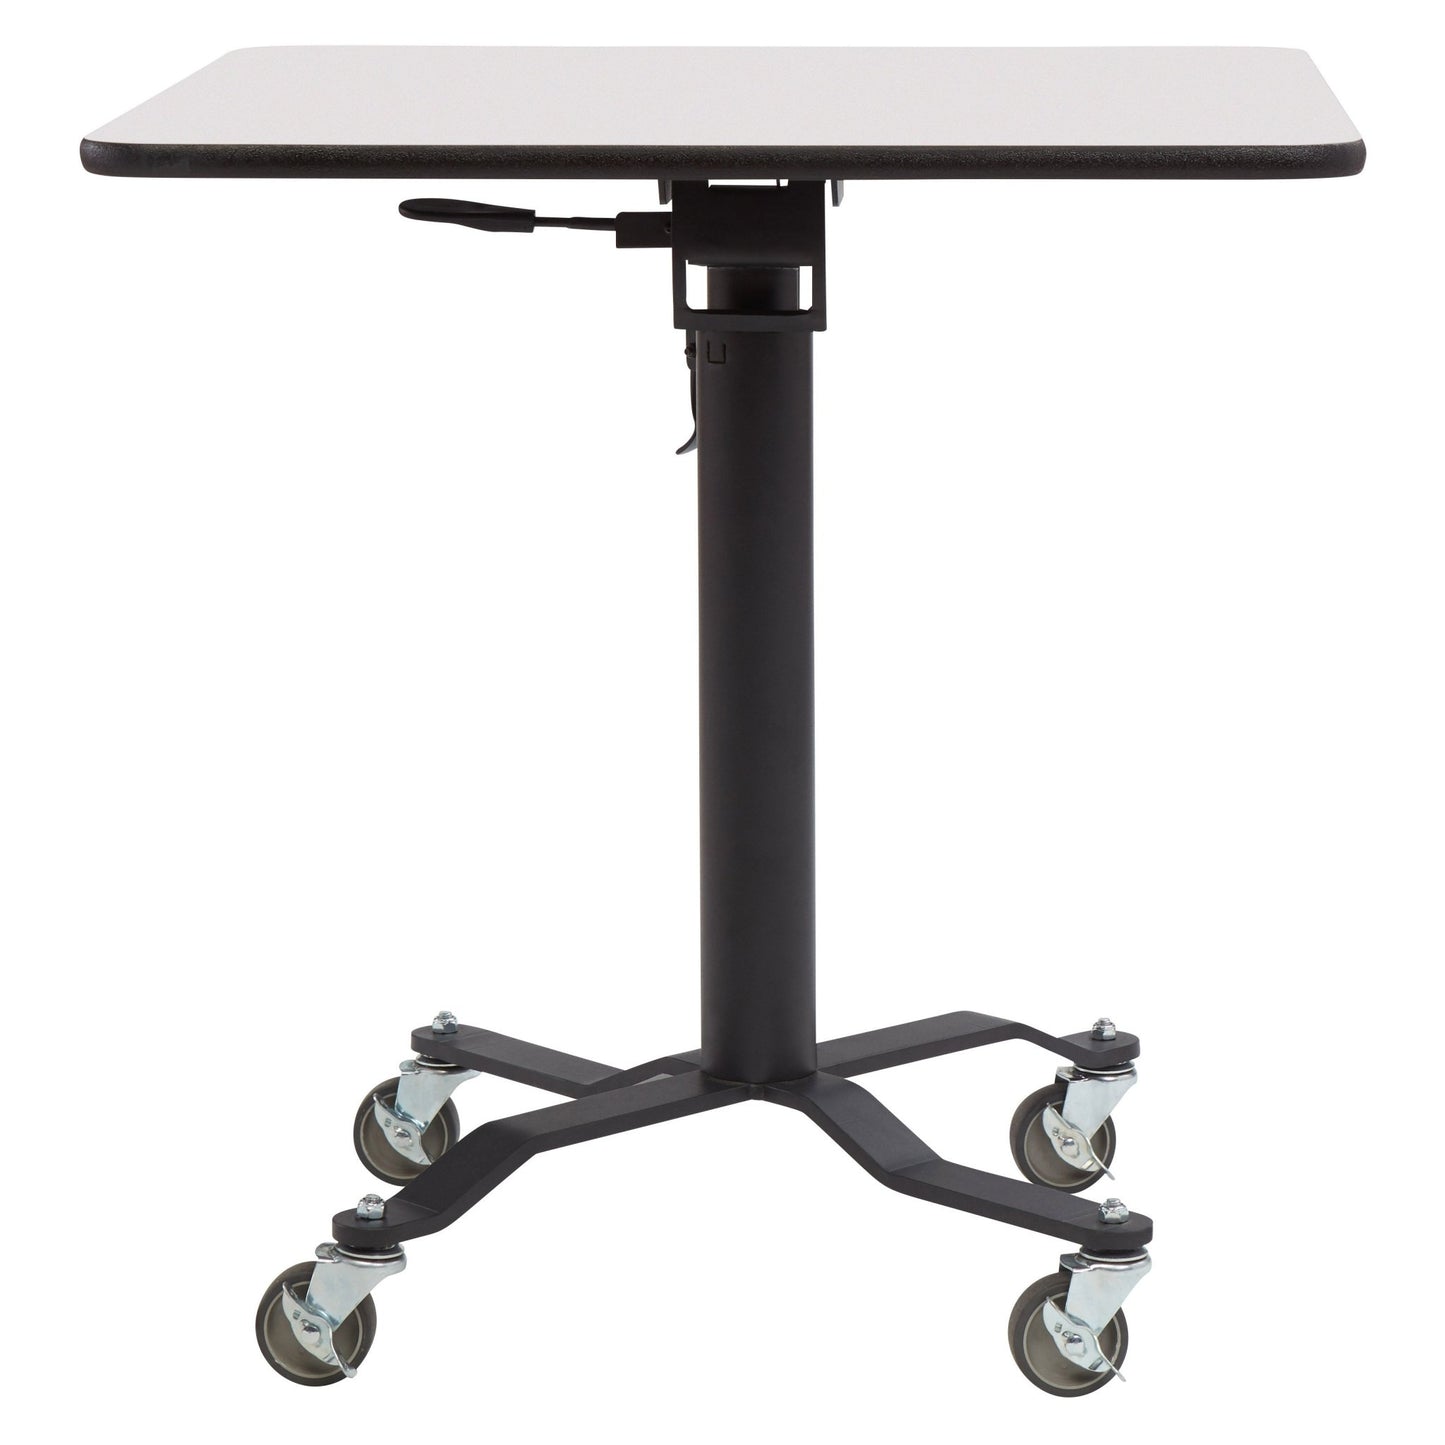 NPS Cafe Time II Table, 30" Square, Whiteboard Top, Particle Board, Vinyl T-Molding (NationalPublic Seating NPS-PCT330PBTMWB) - SchoolOutlet